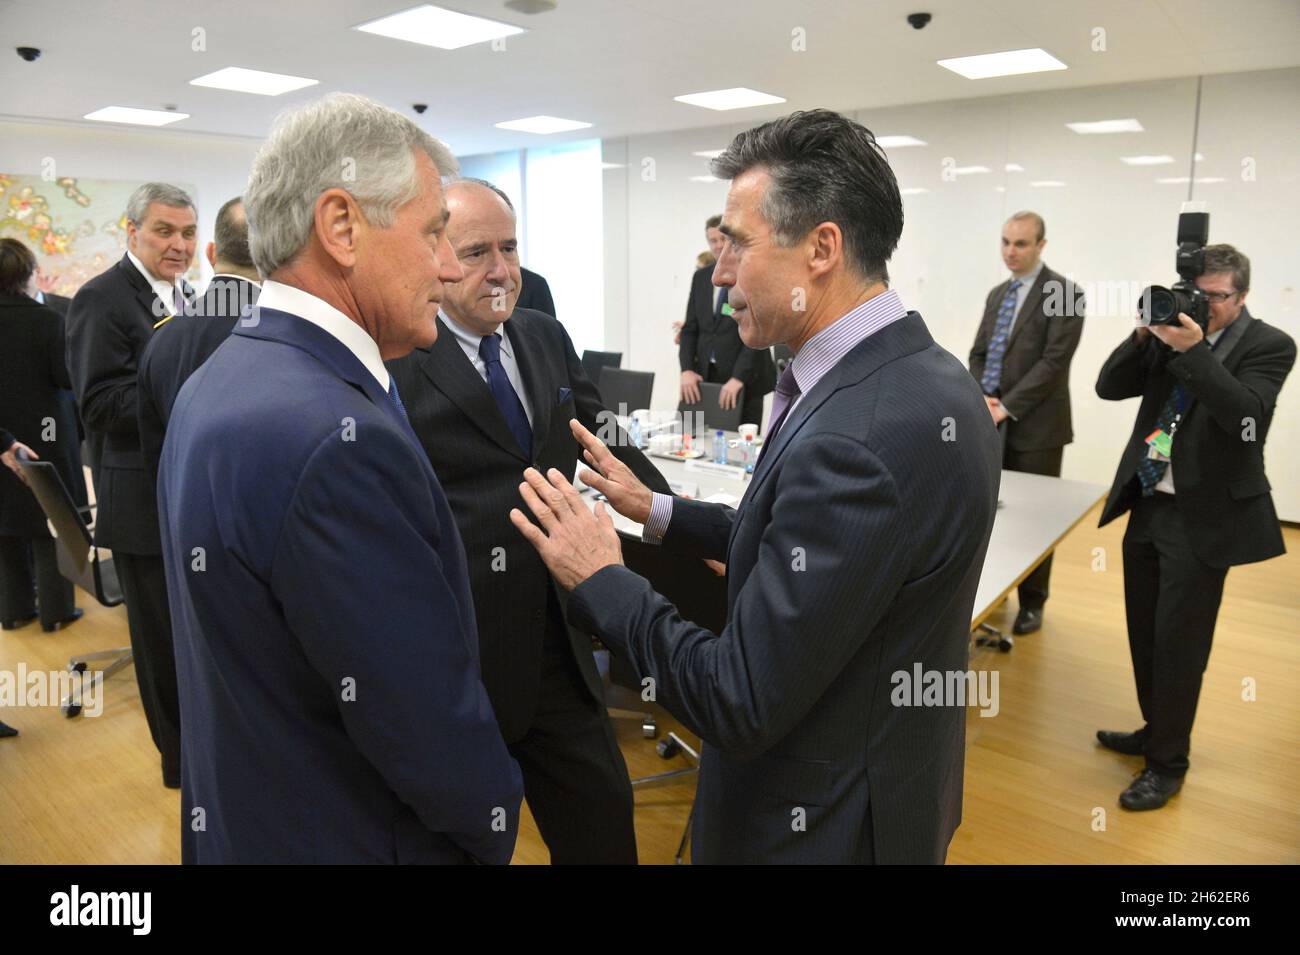 Secretary of Defense Chuck Hagel meets with NATO Secretary General, Anders Fogh Rasmussen as he attends the NATO Defense Ministerial meetings in Brussels, Belgium, Feb. 26, 2014. Stock Photo